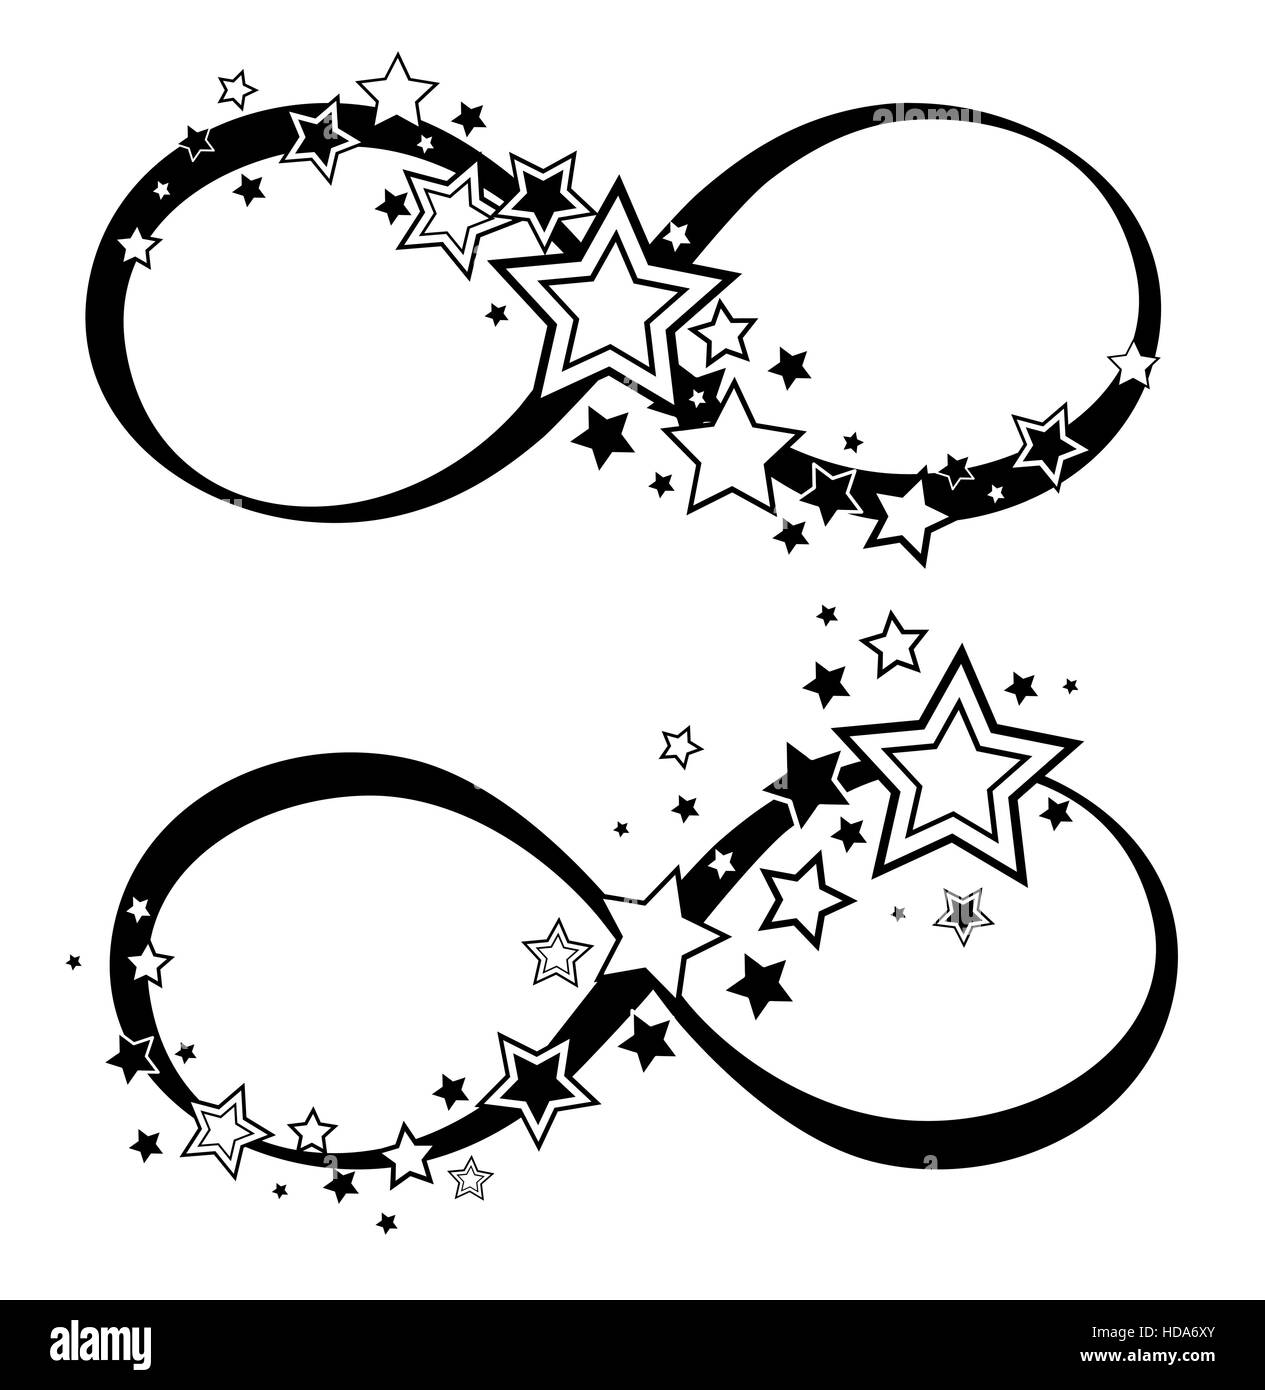 Two isolated infinity symbol with contoured stars and comets Stock Vector